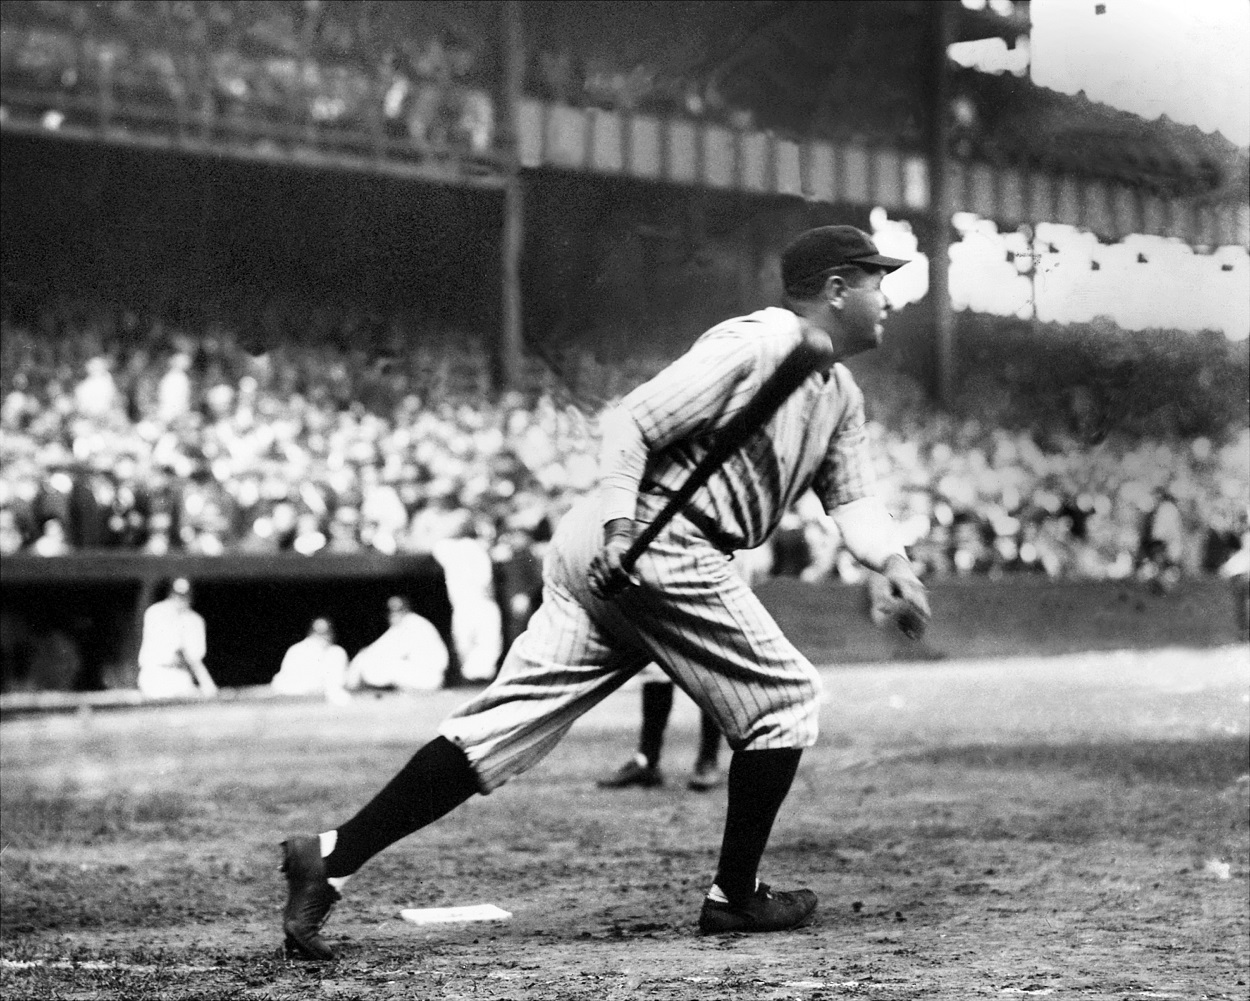 Babe Ruth Actually Hit 715 Home Runs During His MLB Career and Was Given Credit for That Number for About a Week